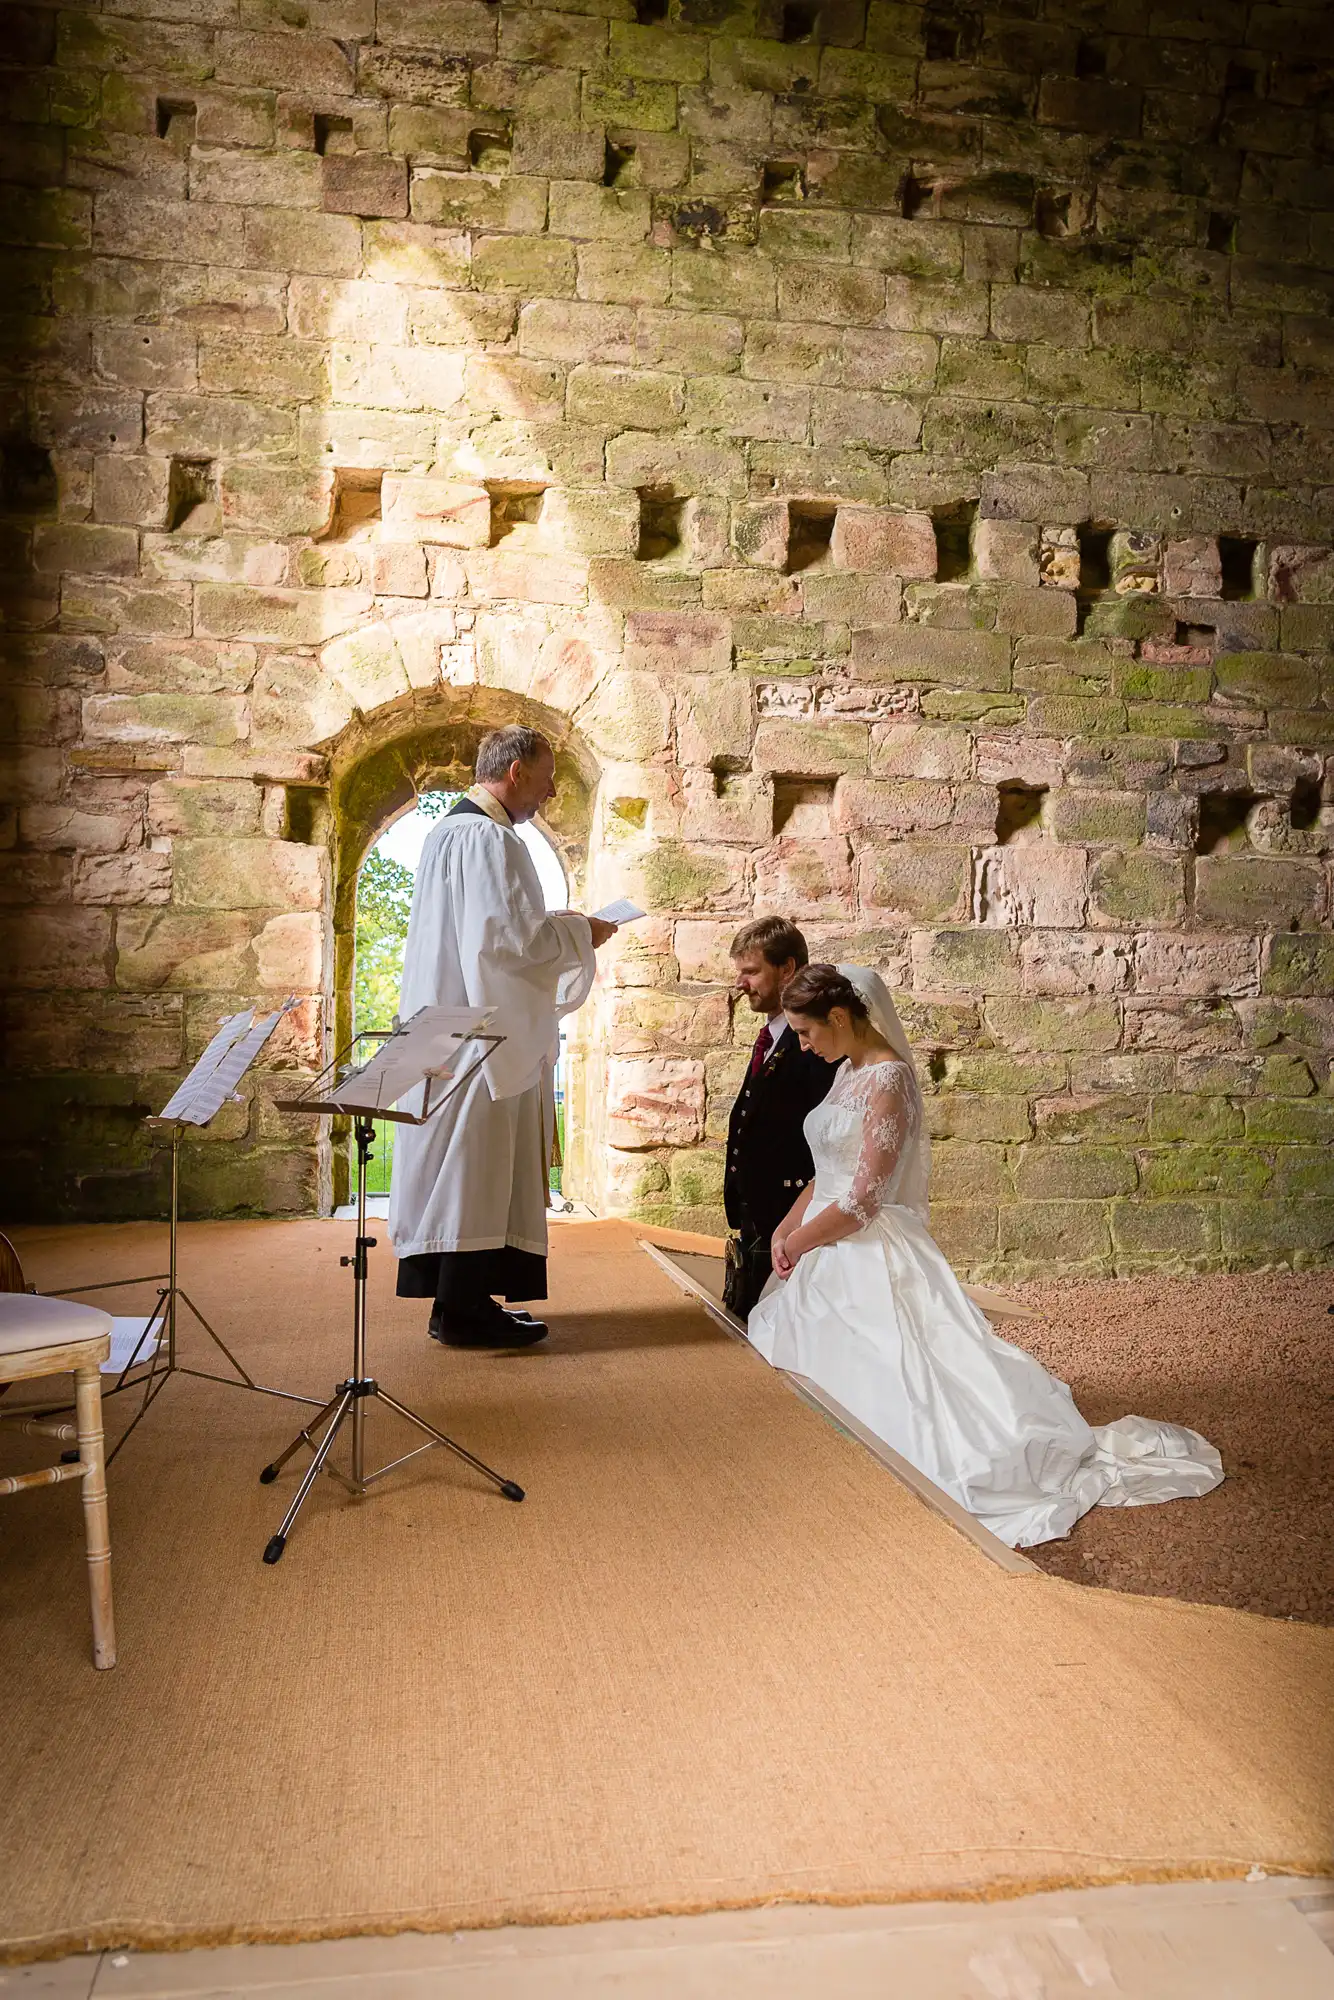 A wedding ceremony in a historic stone building, with a bride and groom kneeling and a priest officiating from a book.